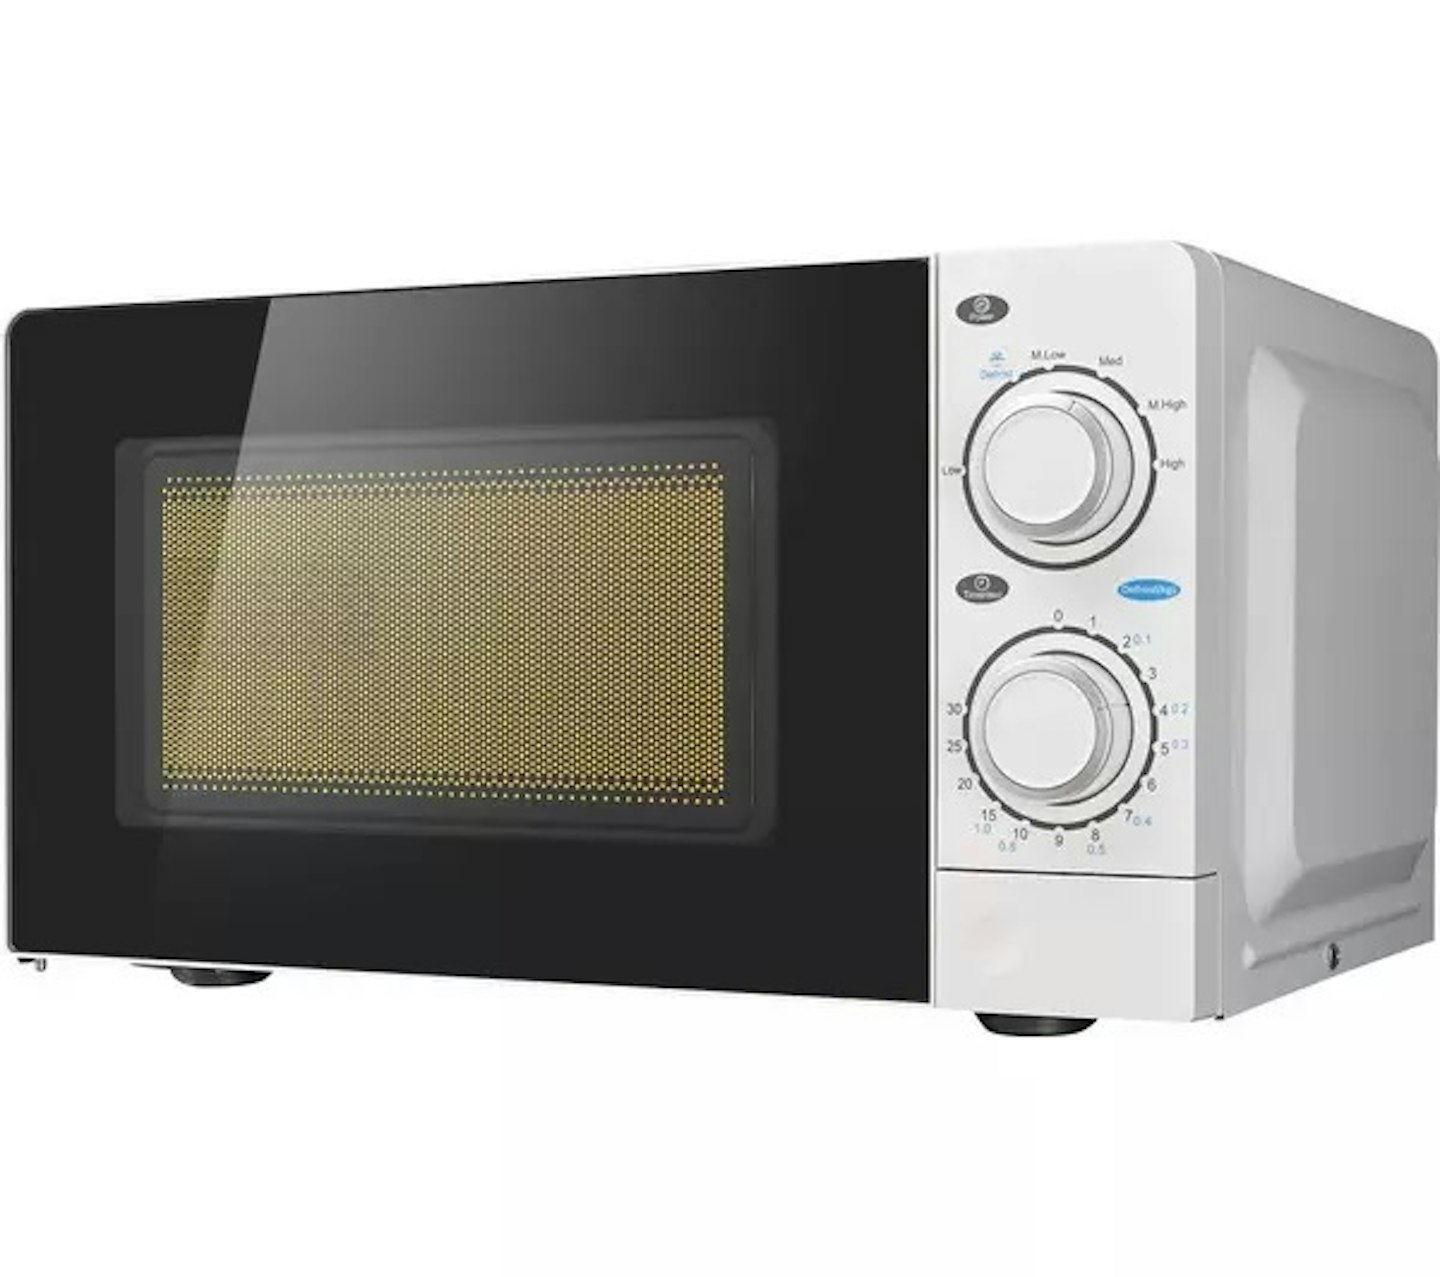 ESSENTIALS CMW21 Compact Solo Microwave